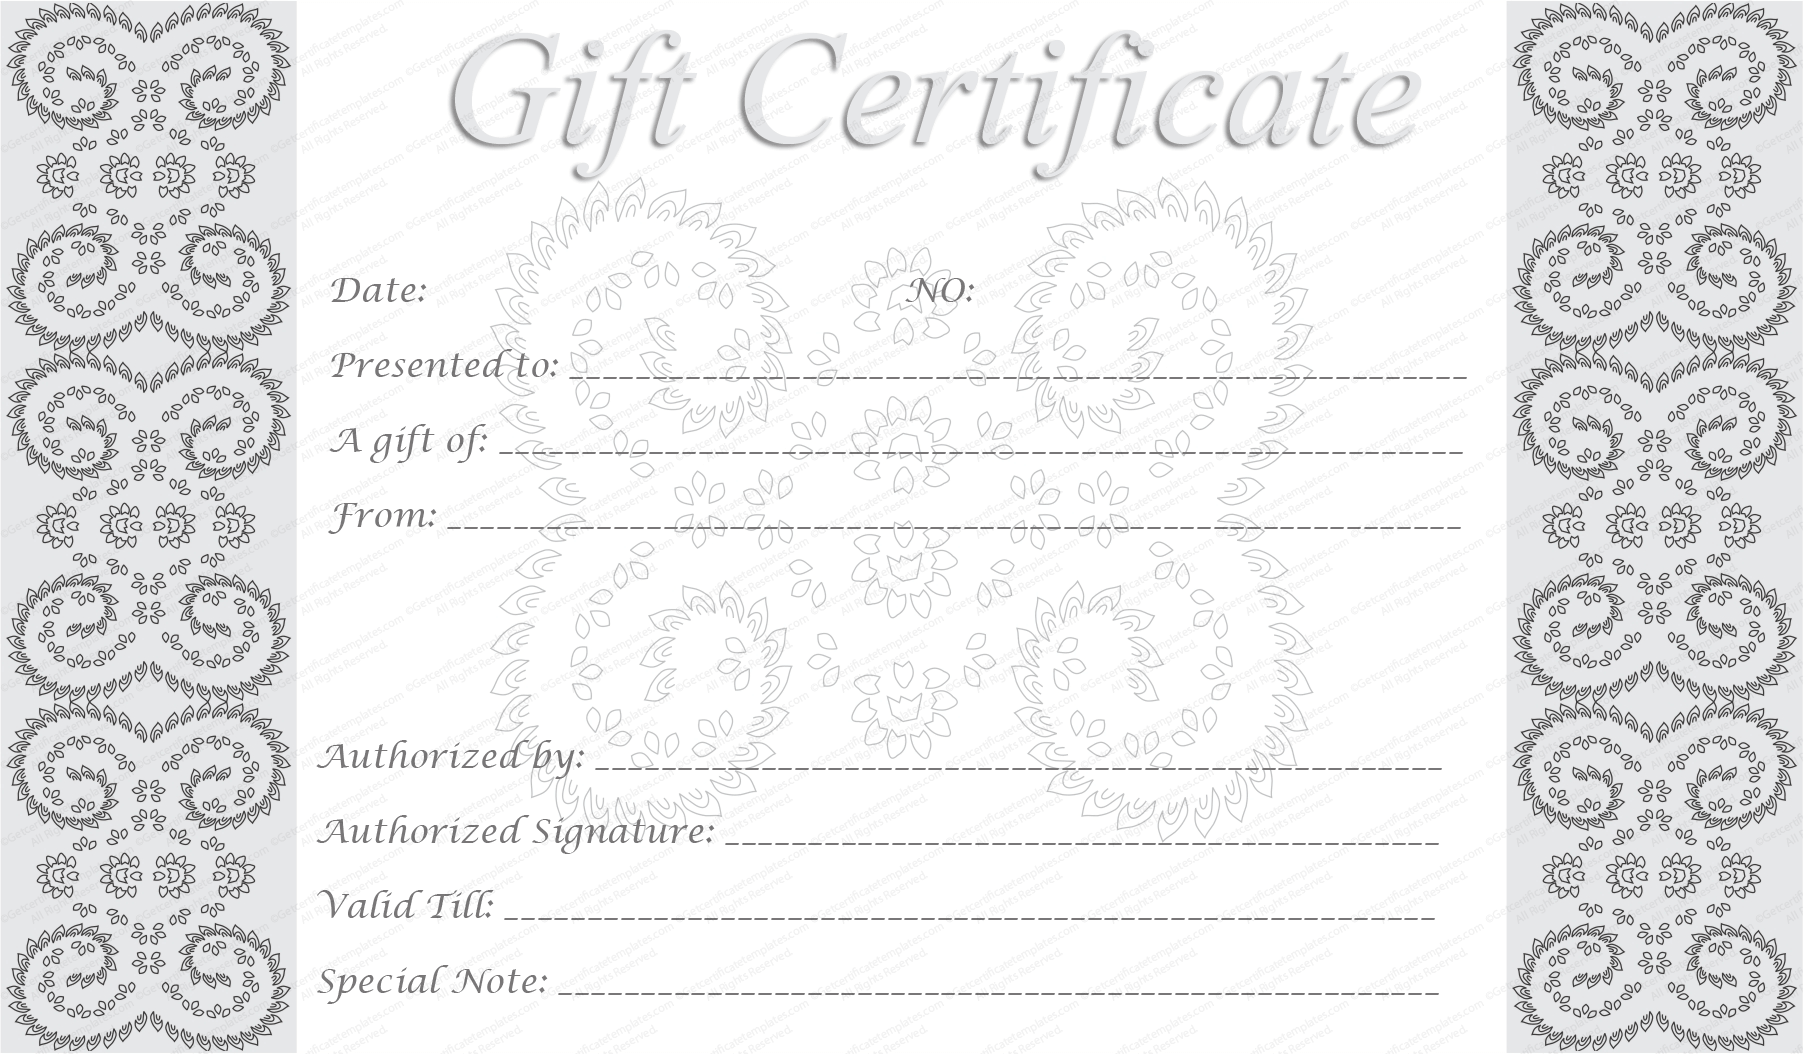 free birthday gift certificate word template